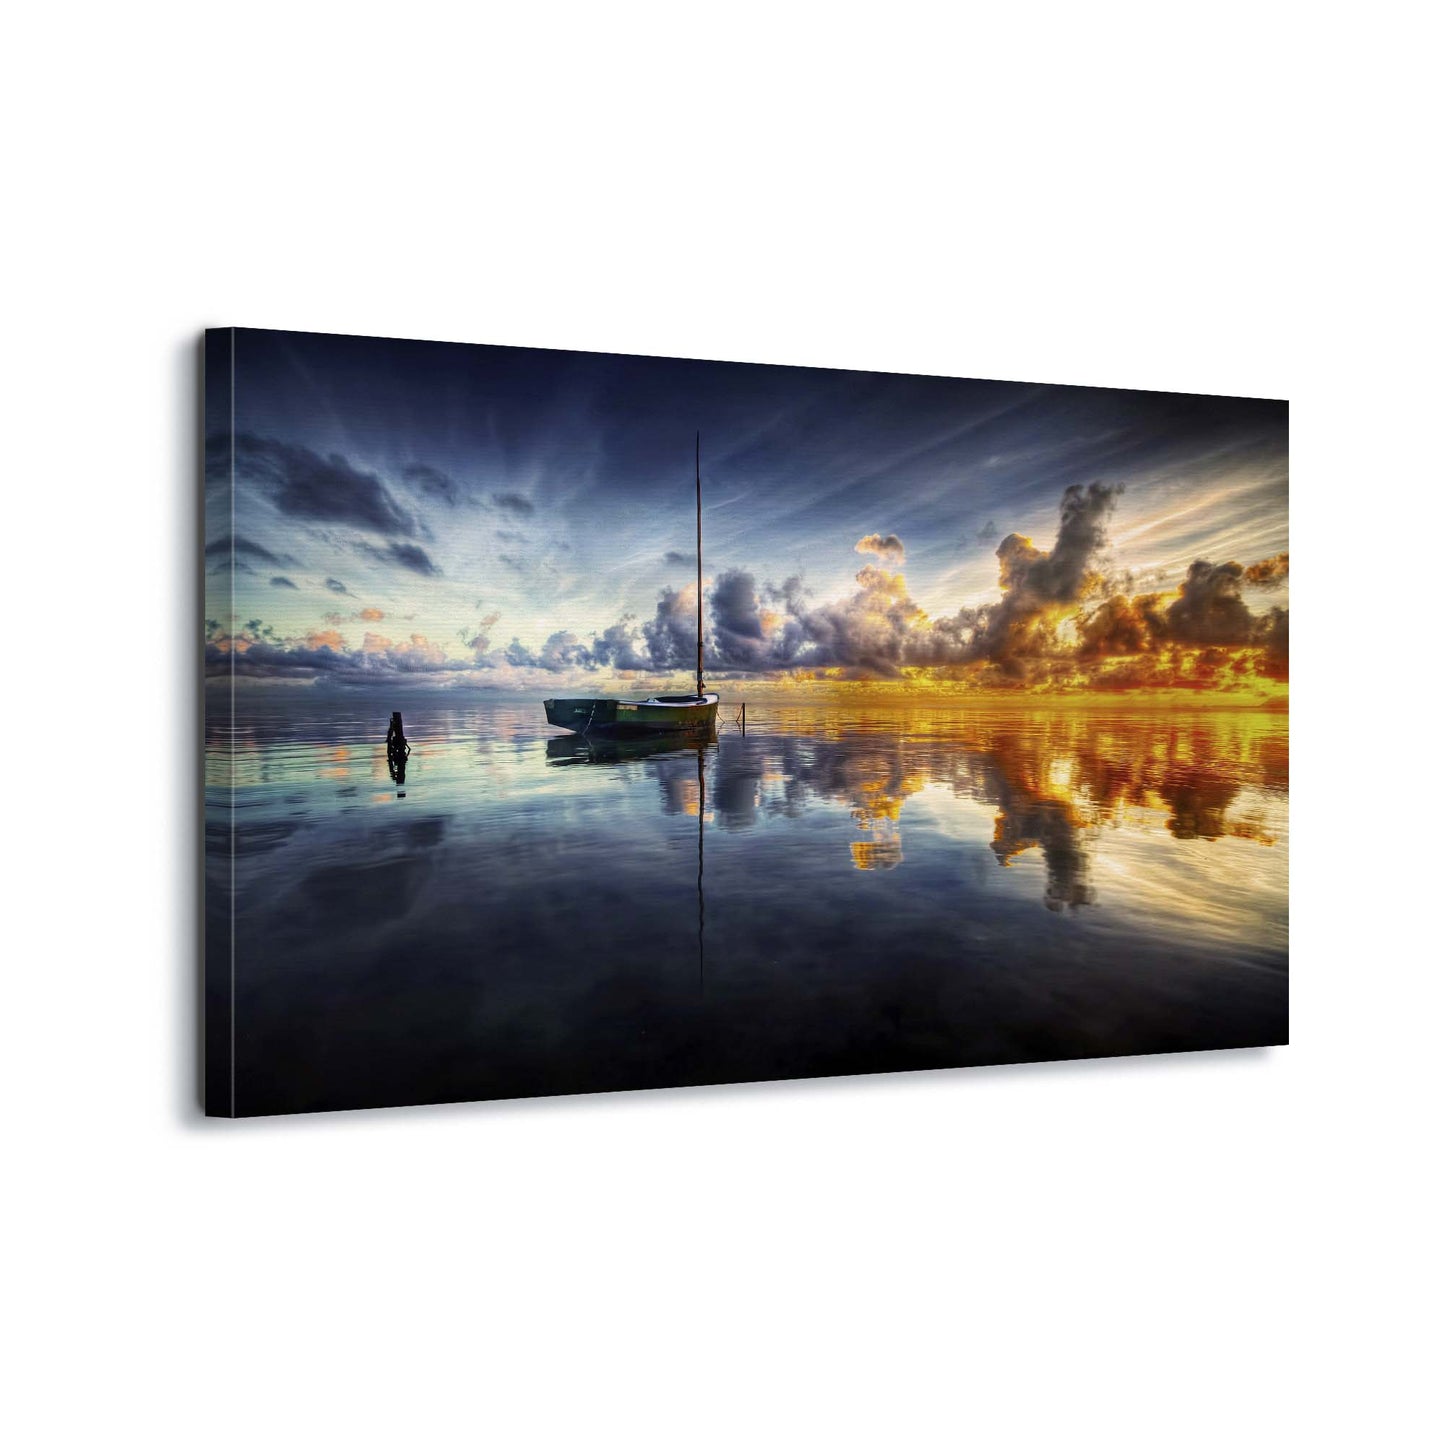 A Time For Reflection by Mark Yugawa Canvas Print - USTAD HOME